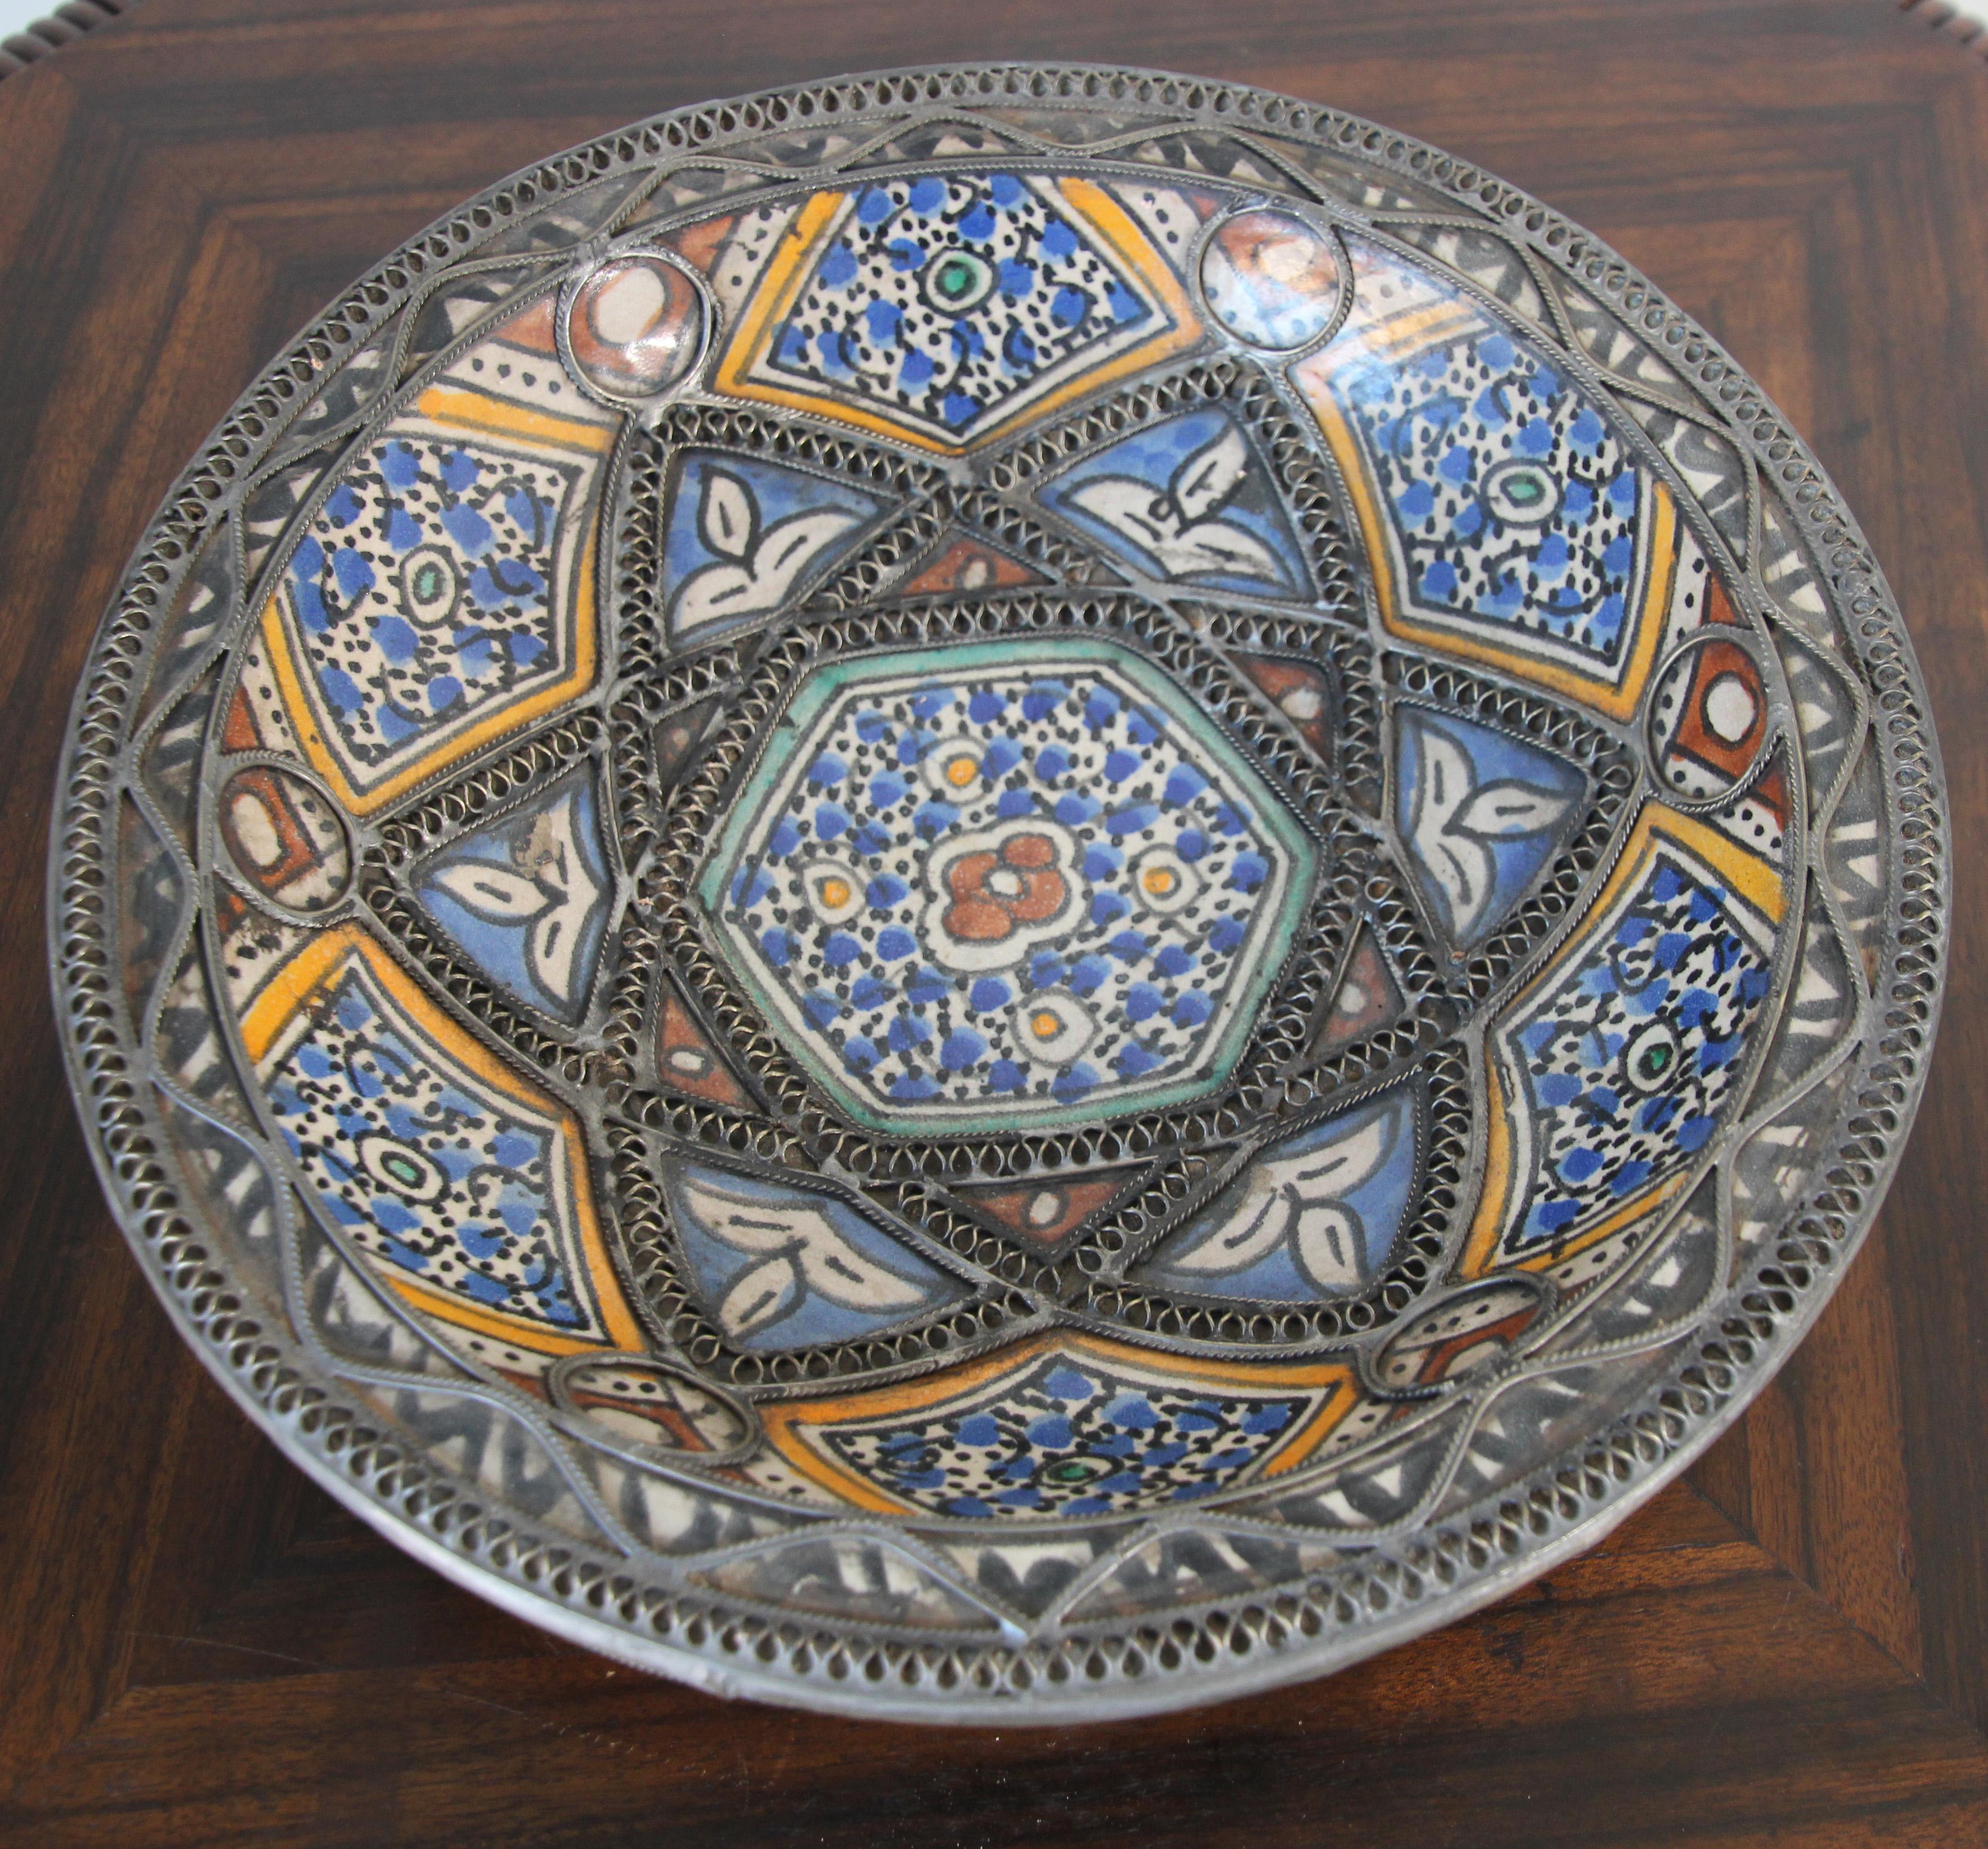 Handcrafted Moroccan polychrome decorative ceramic Bowl, Moorish dish from Fez.
Moroccan ceramic bowl in Bleu de Fez, very nice designs hand painted by artist in Fez.
Geometrical and floral Moorish designs and adorned with nickel silver filigree